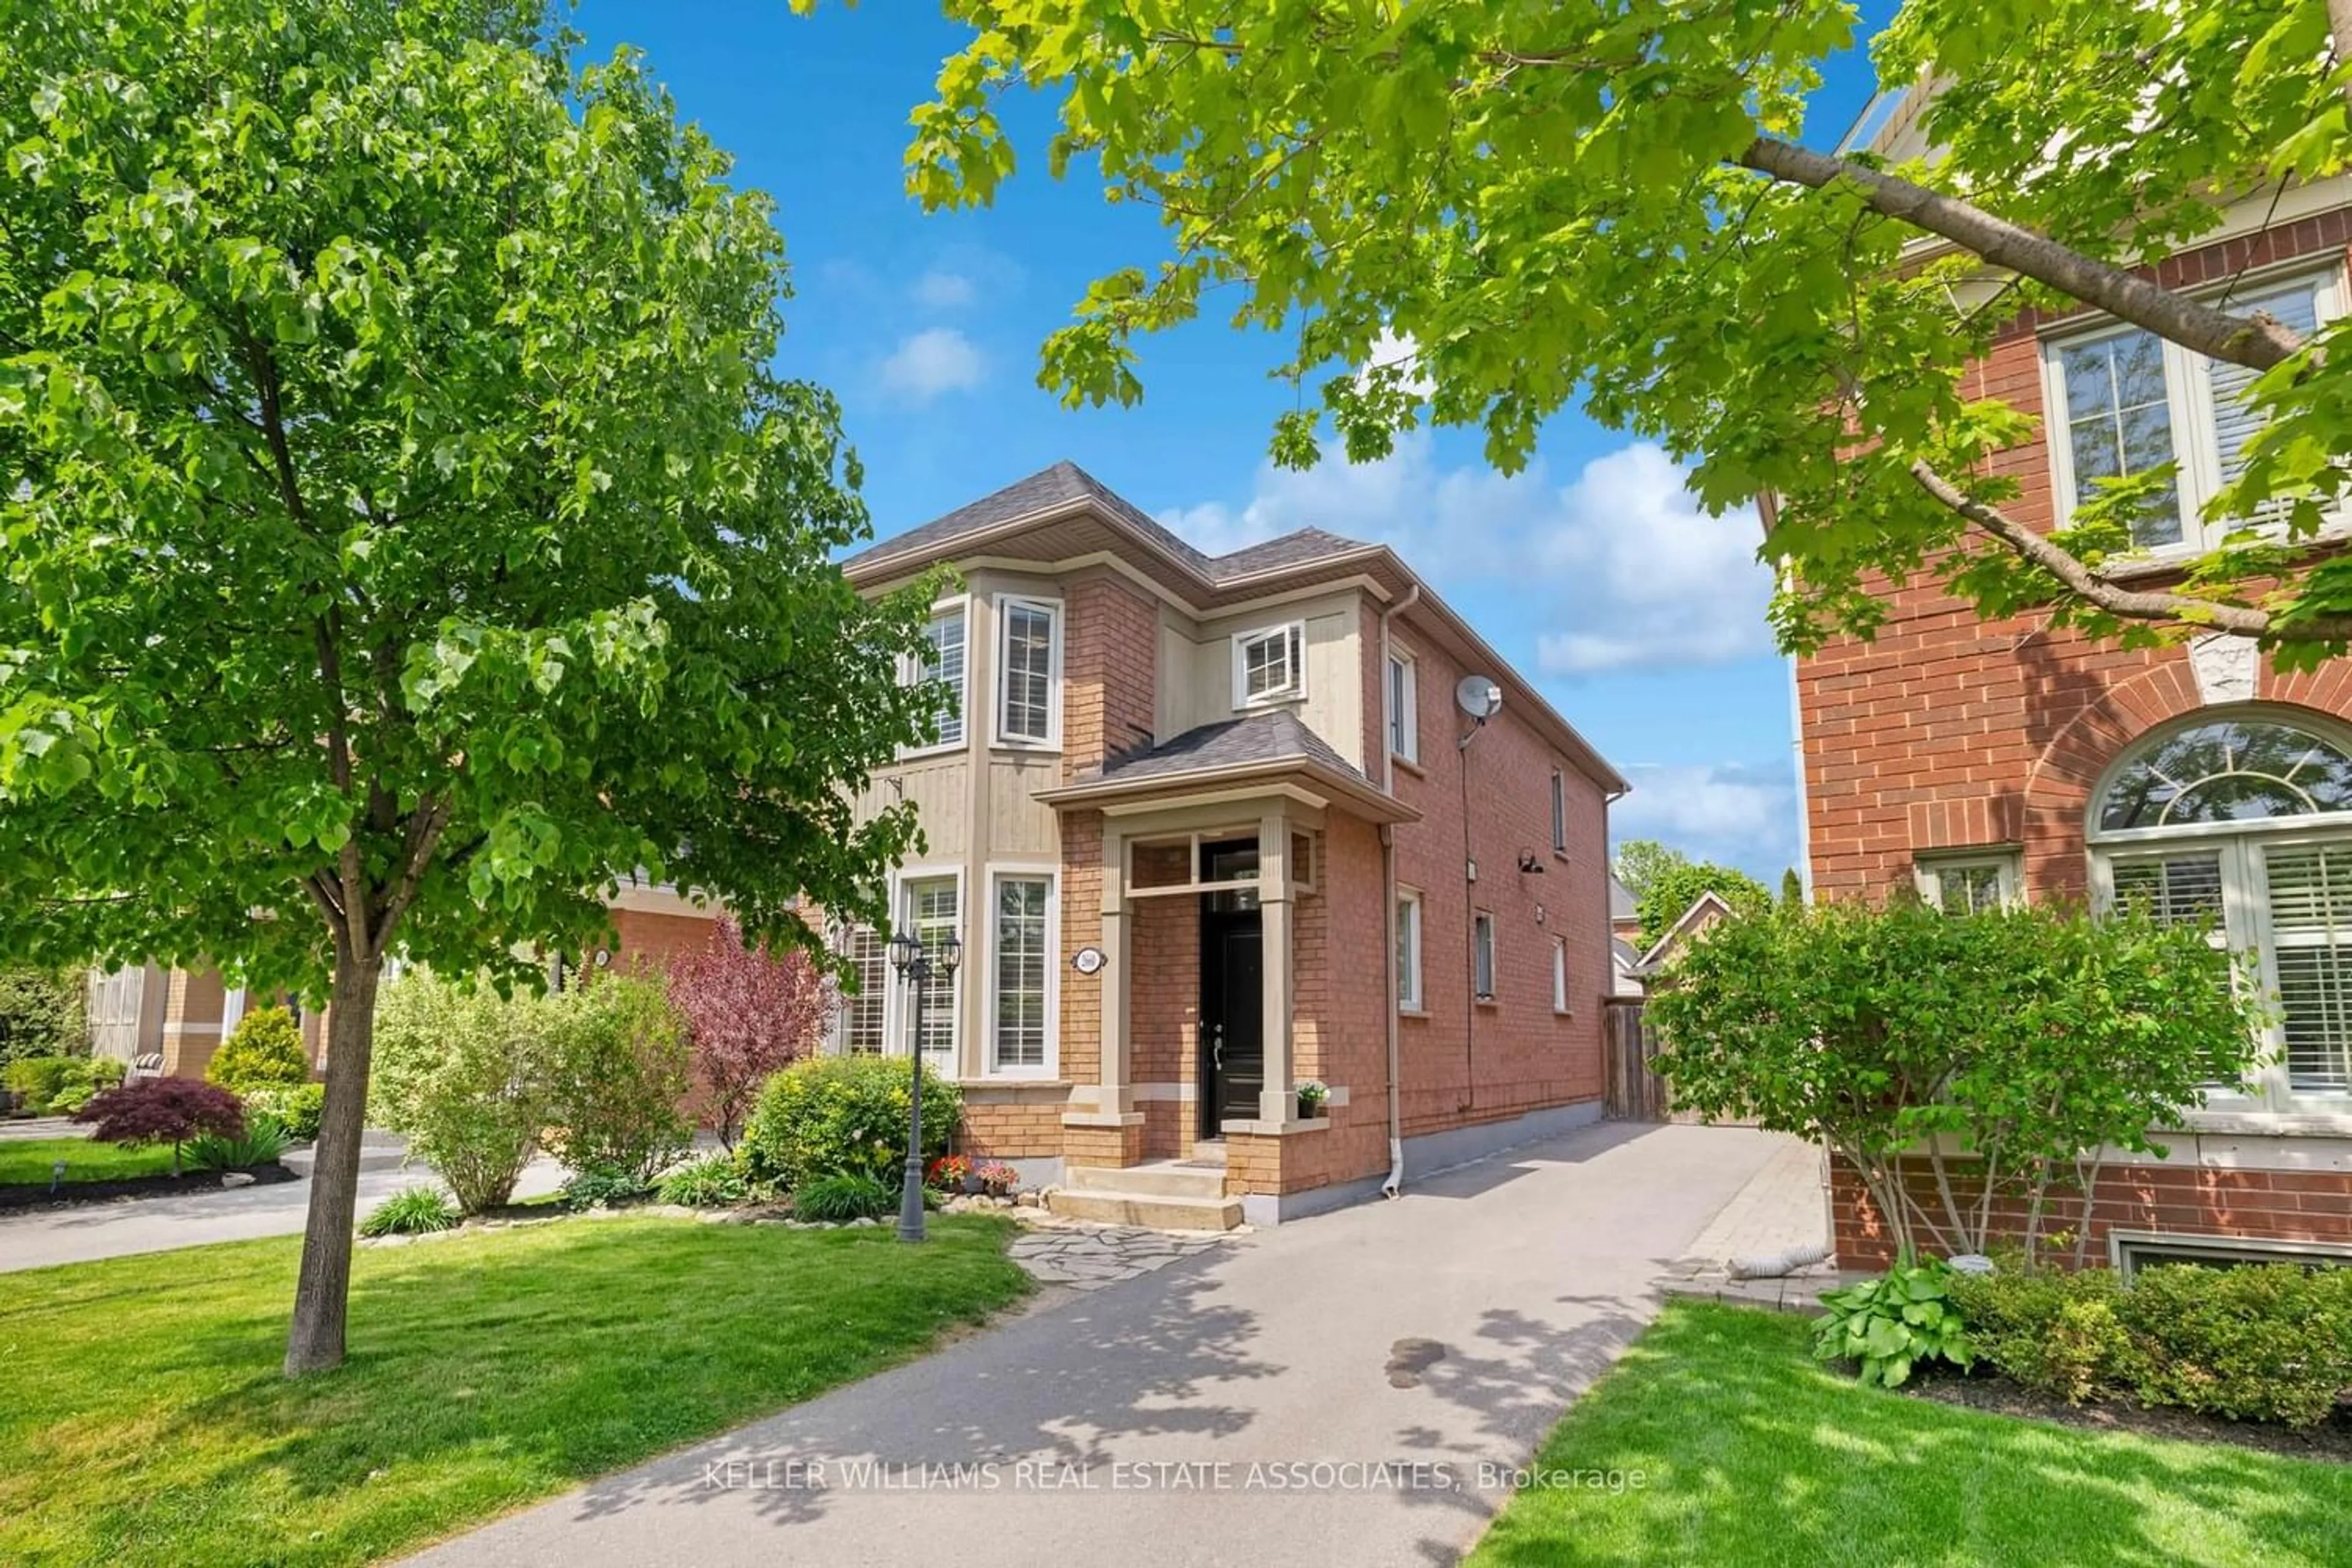 Home with brick exterior material for 2660 Devonsley Cres, Oakville Ontario L6H 6J2